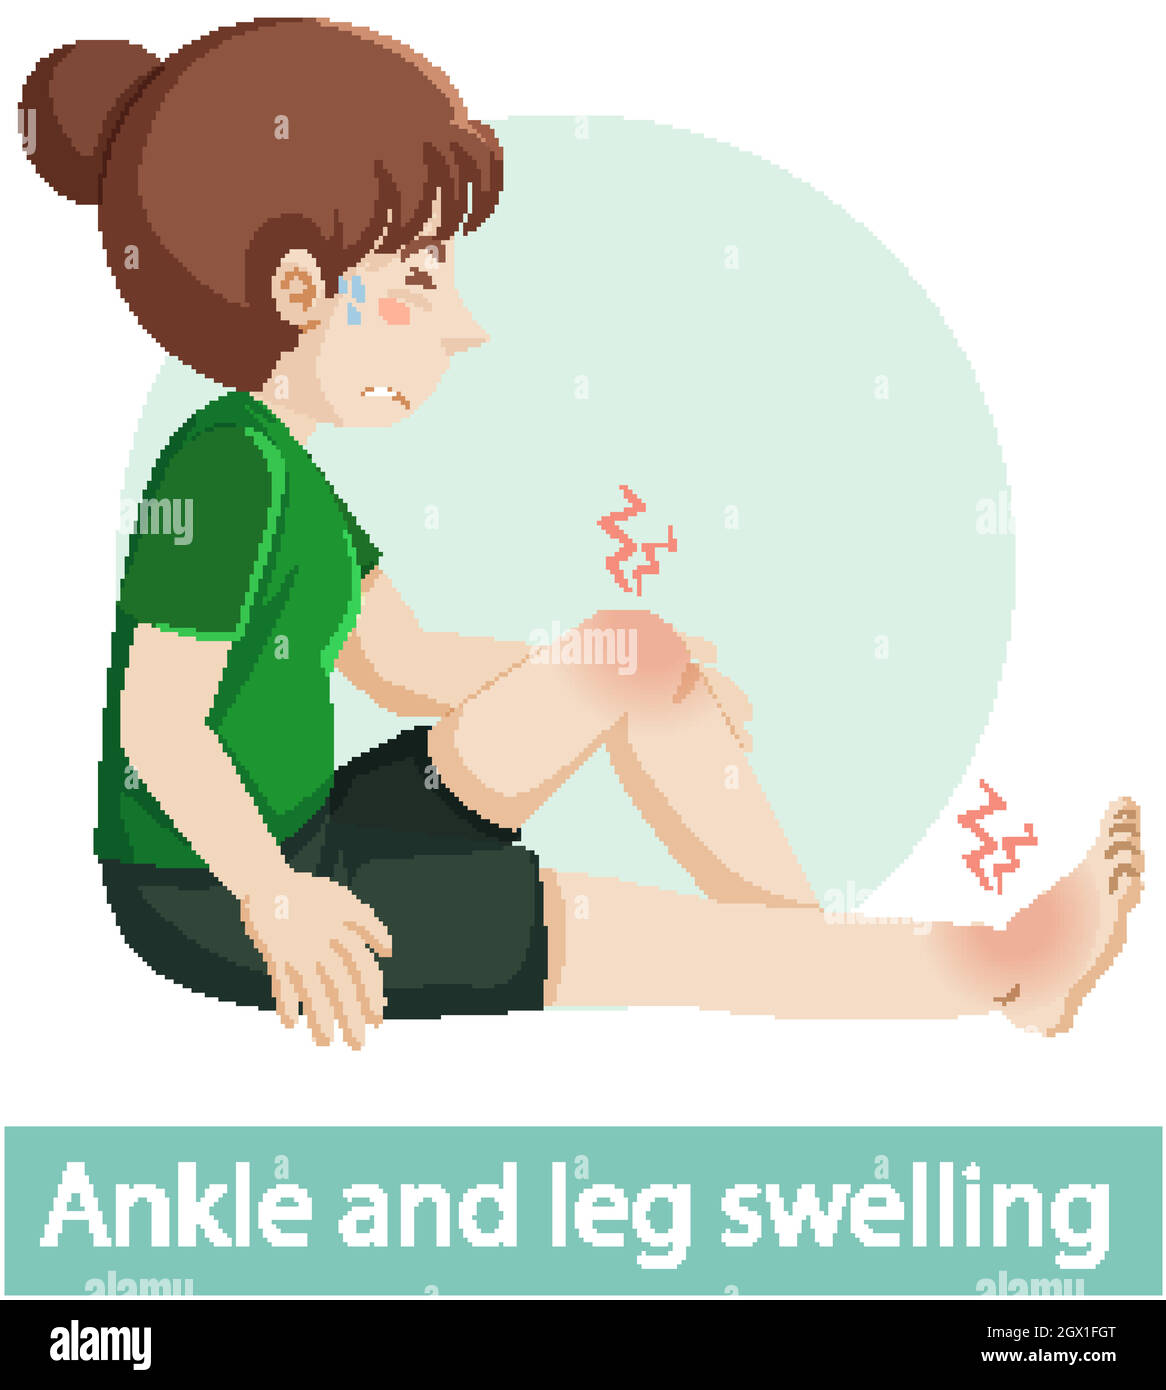 Cartoon character with ankle and leg swelling symptoms Stock Vector